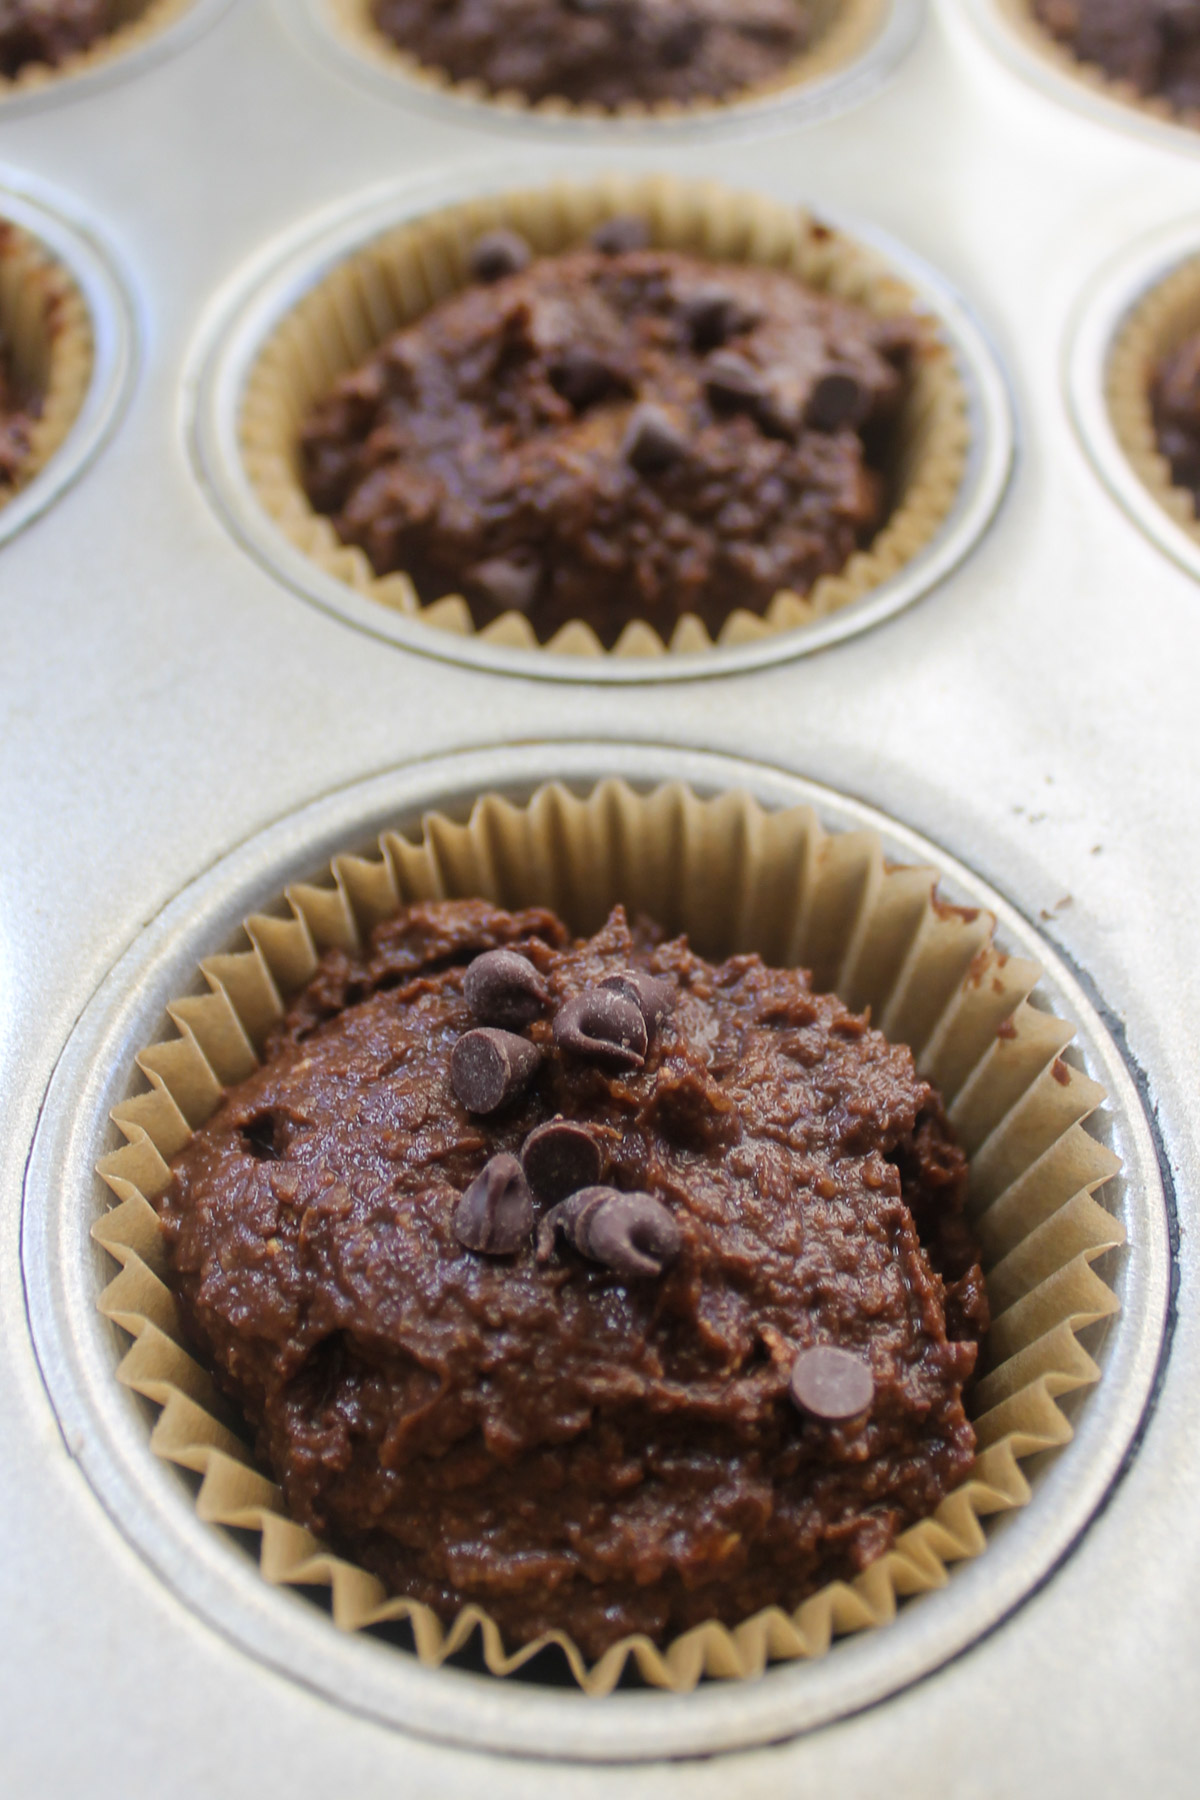 A close up of a filled muffin cup of batter, topped with chocolate chips.